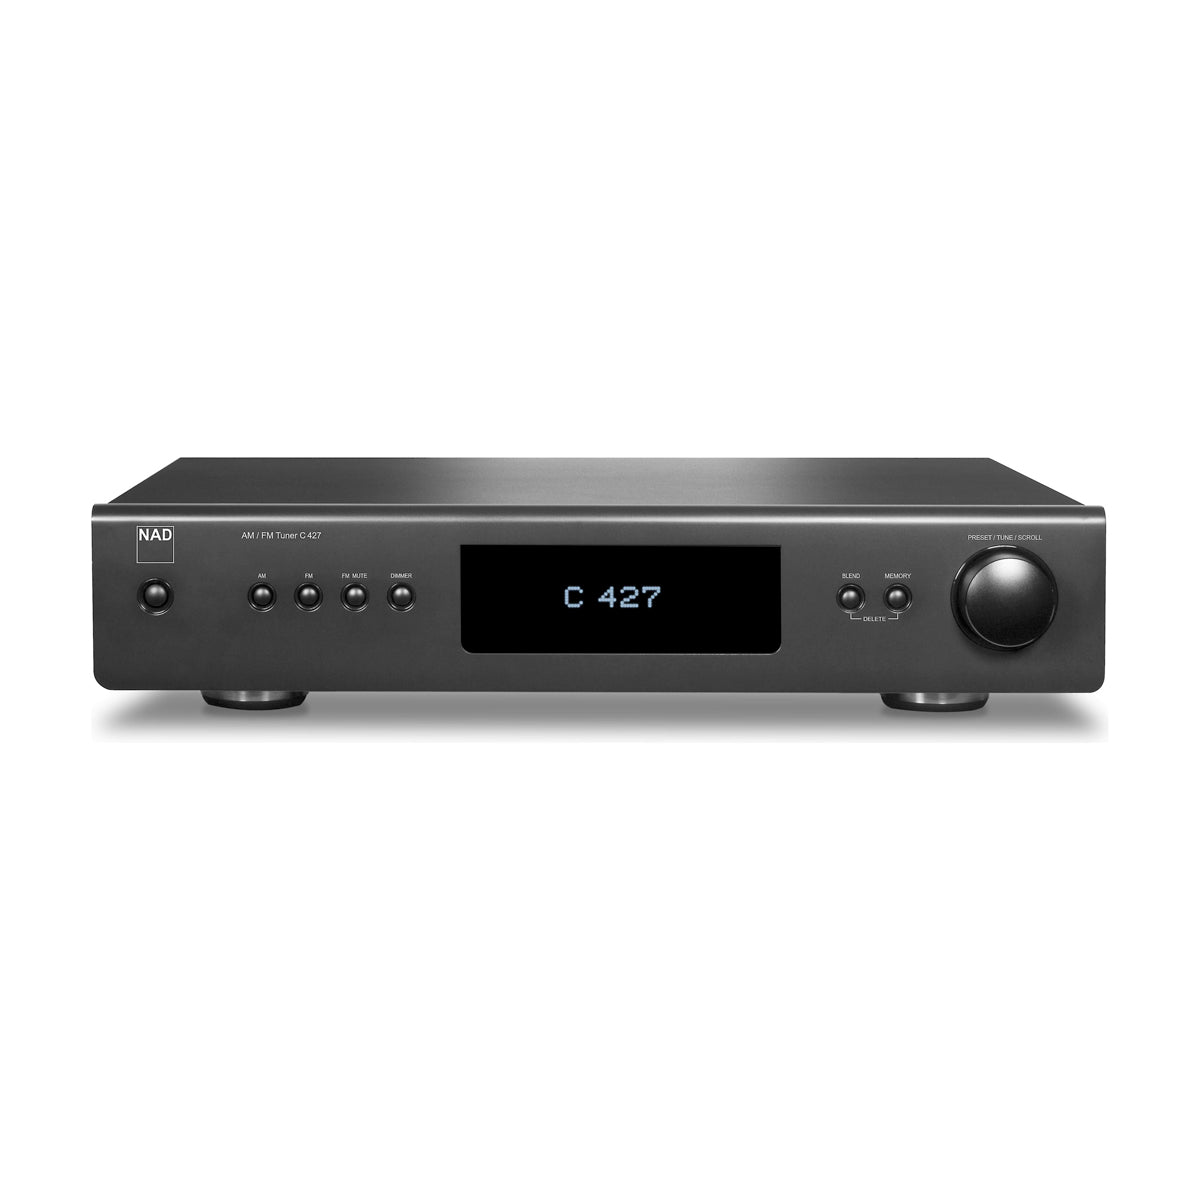 NAD Stereo AM/FM Tuner C427 - The Audio Experts